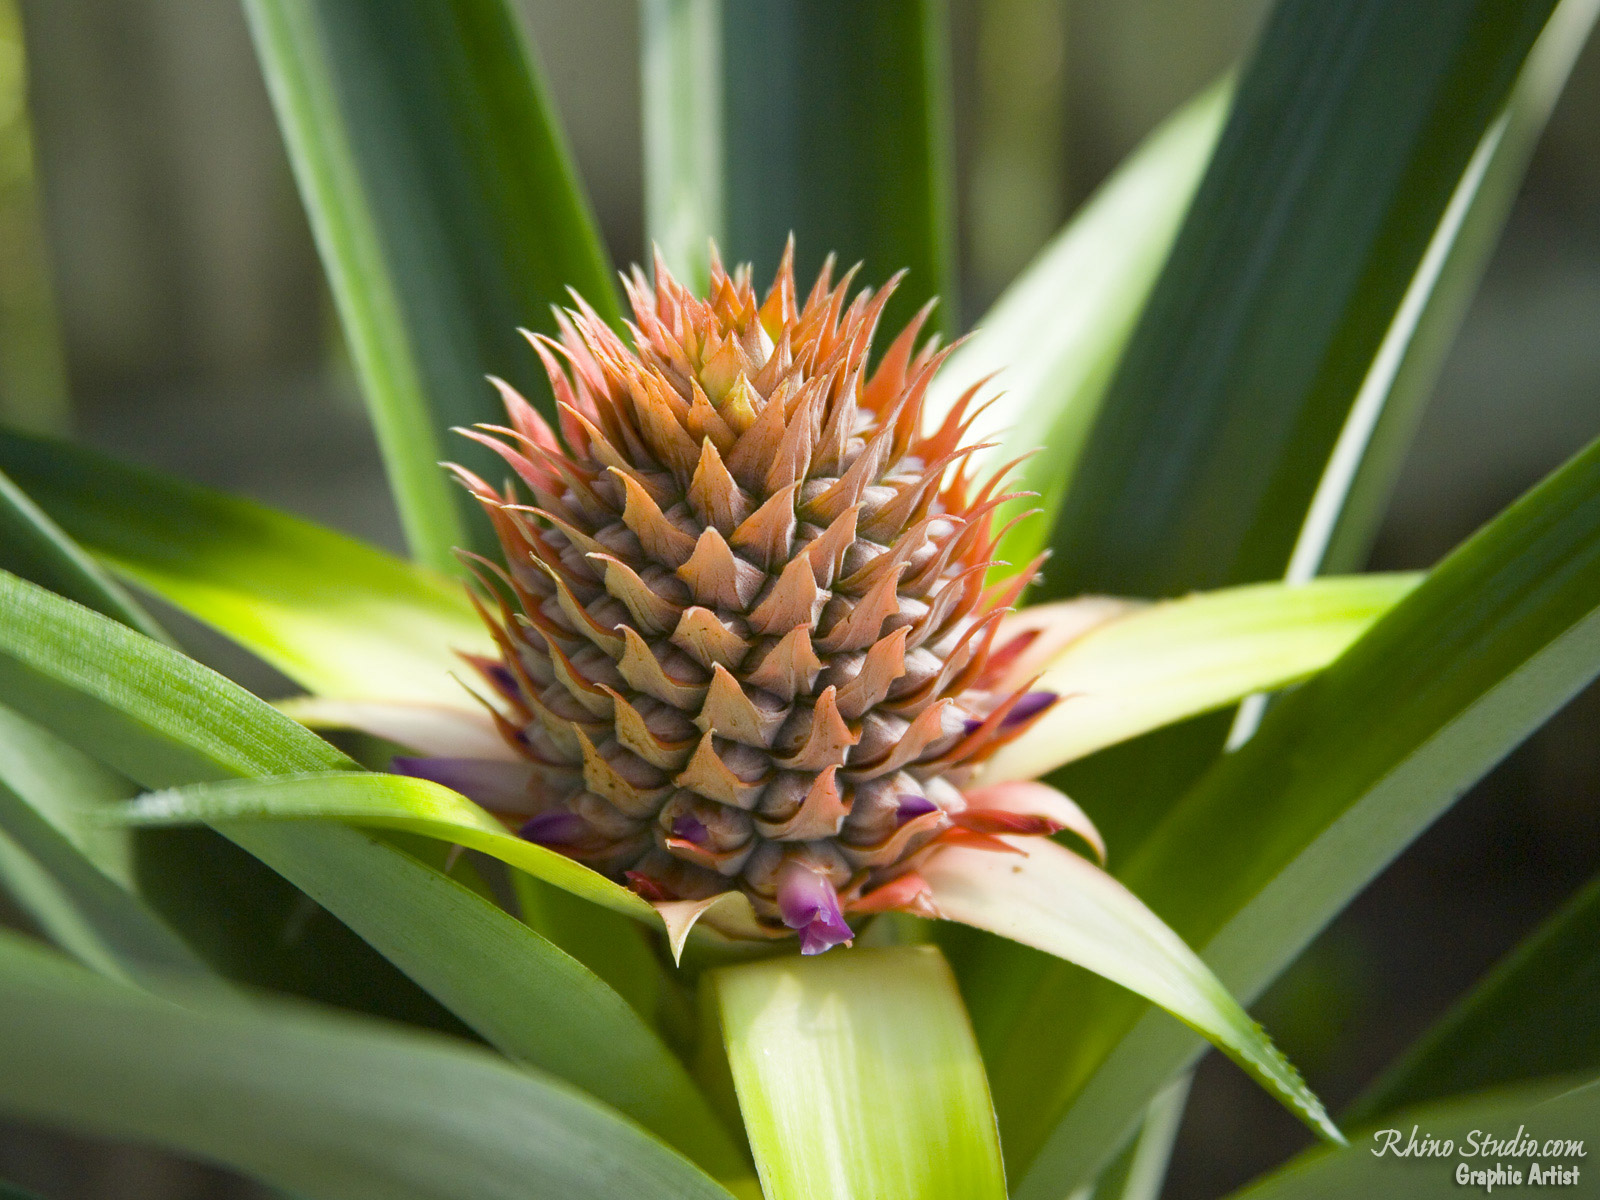 In Germany, bromelain is approved as a post-injury medication because it is thought to reduce inflammation and swelling.